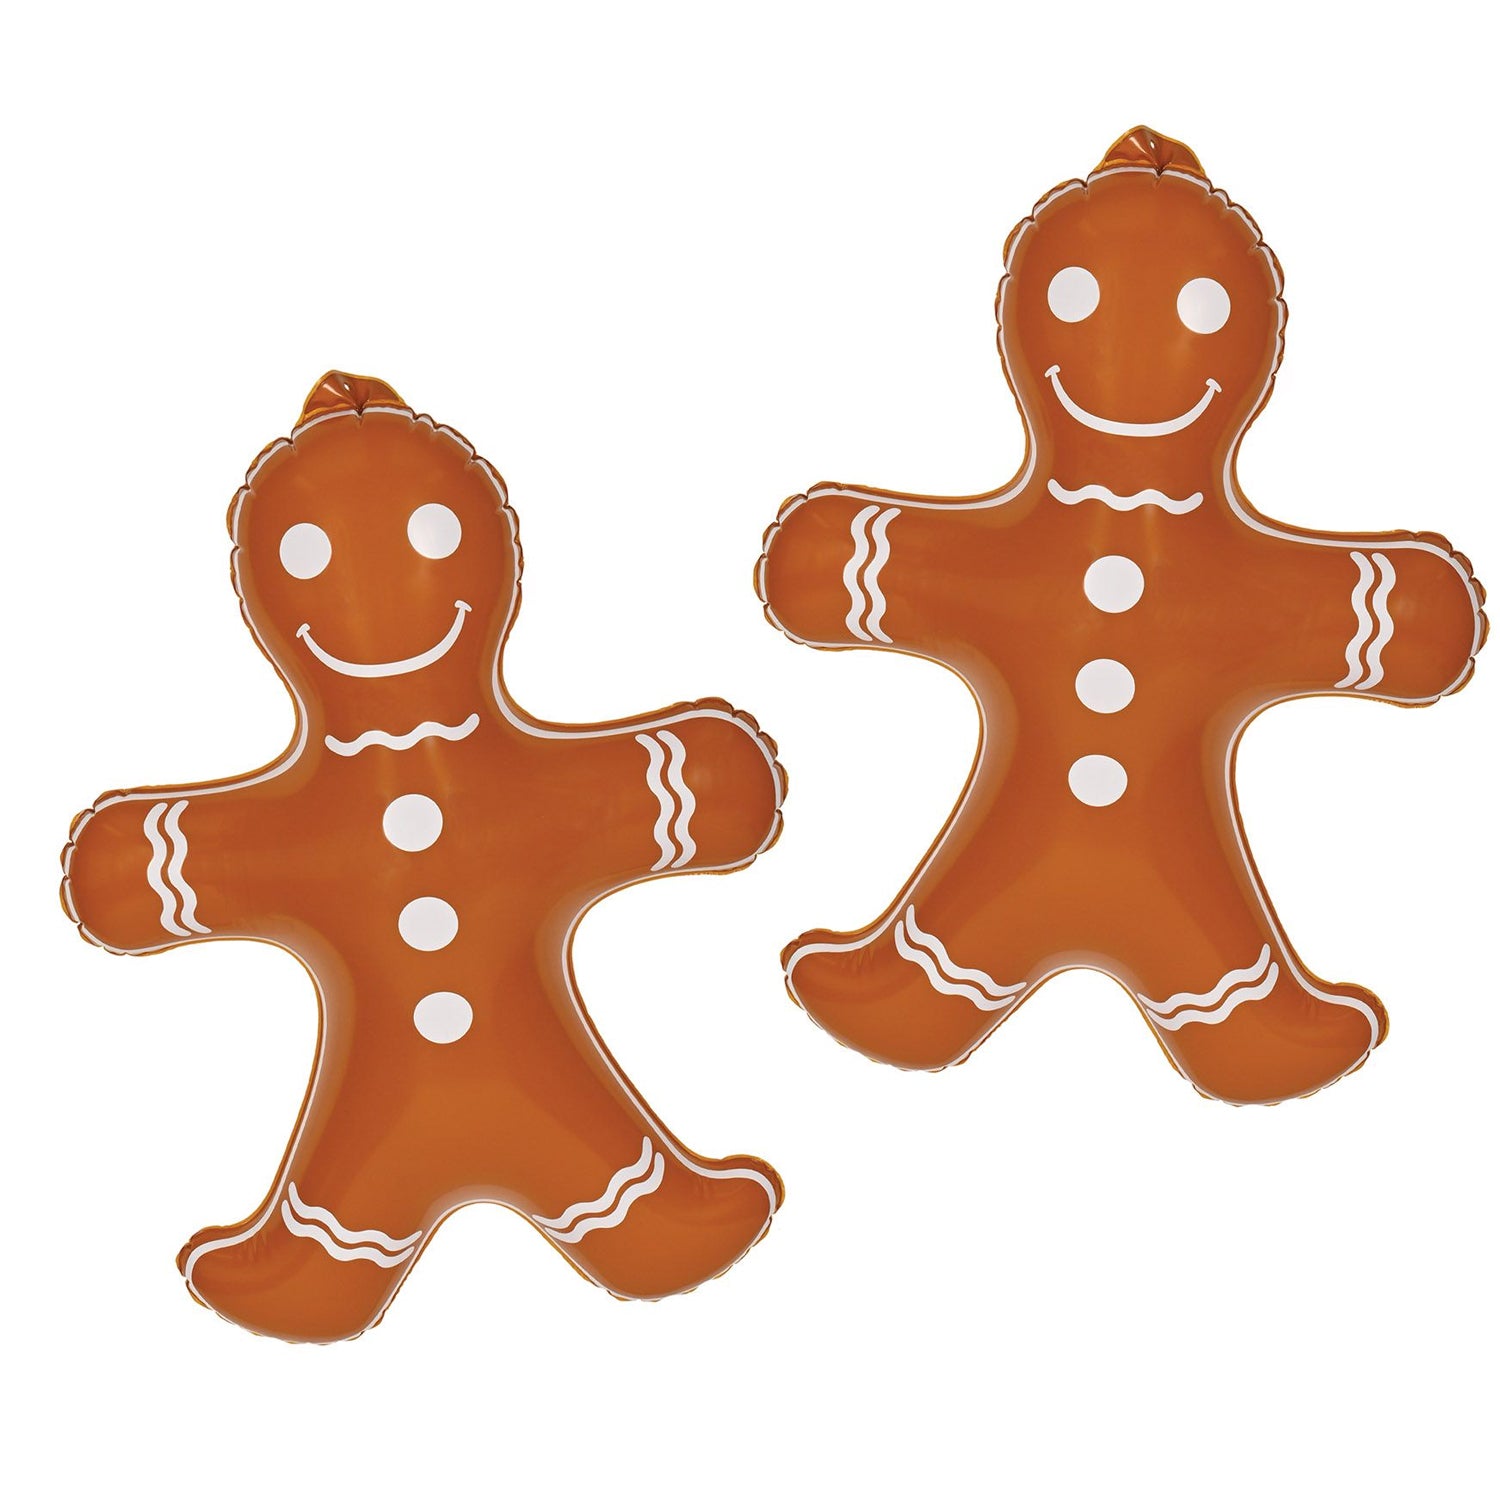 Inflatable Gingerbread Man - 18" and 24" - Pack of 2